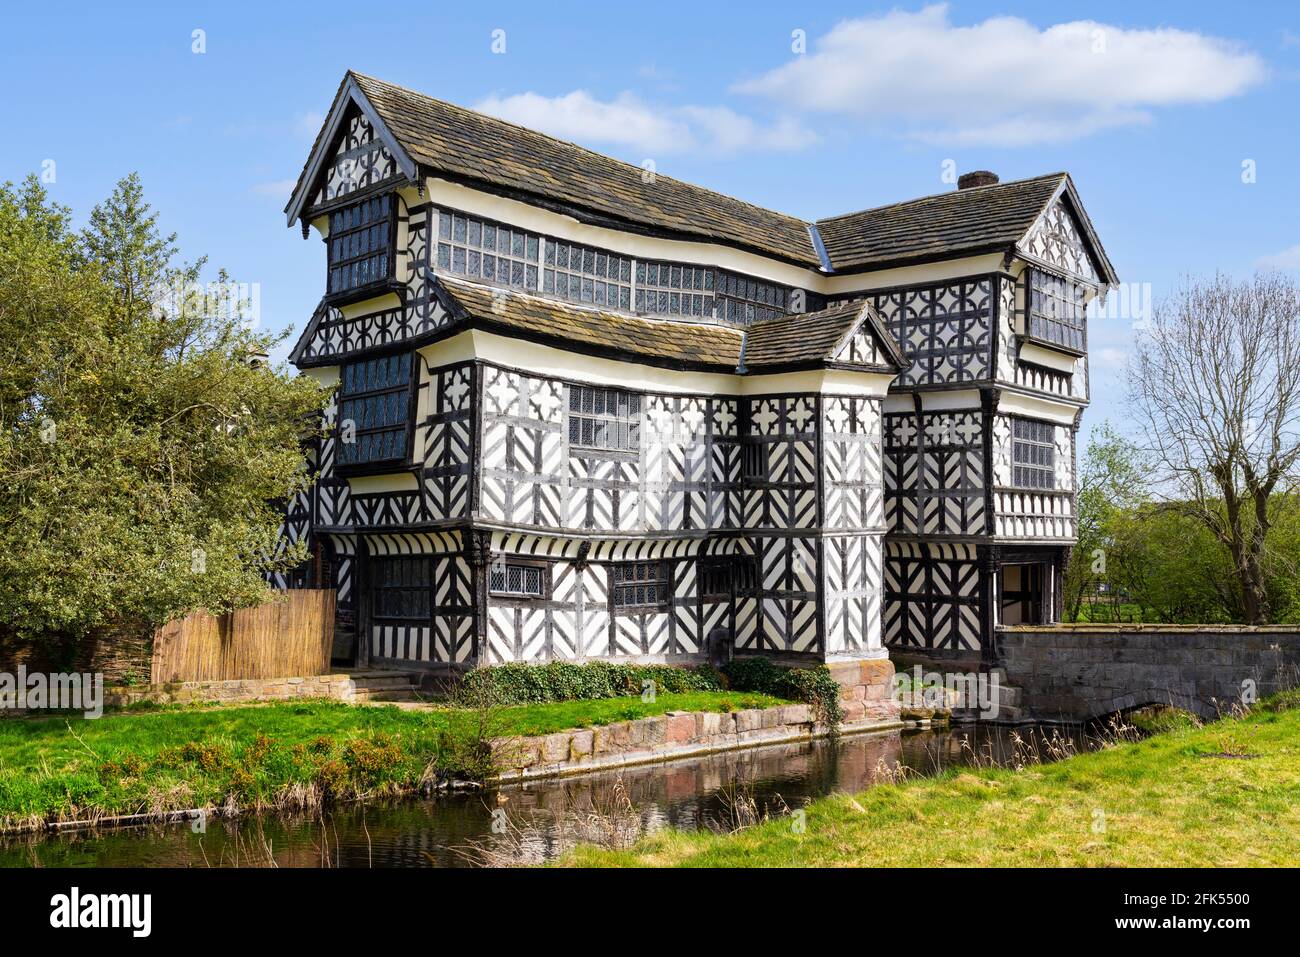 Little Moreton Hall a grade1 listed building black and white half timbered Tudor manor house with a moat Congleton Cheshire England GB UK Europe Stock Photo